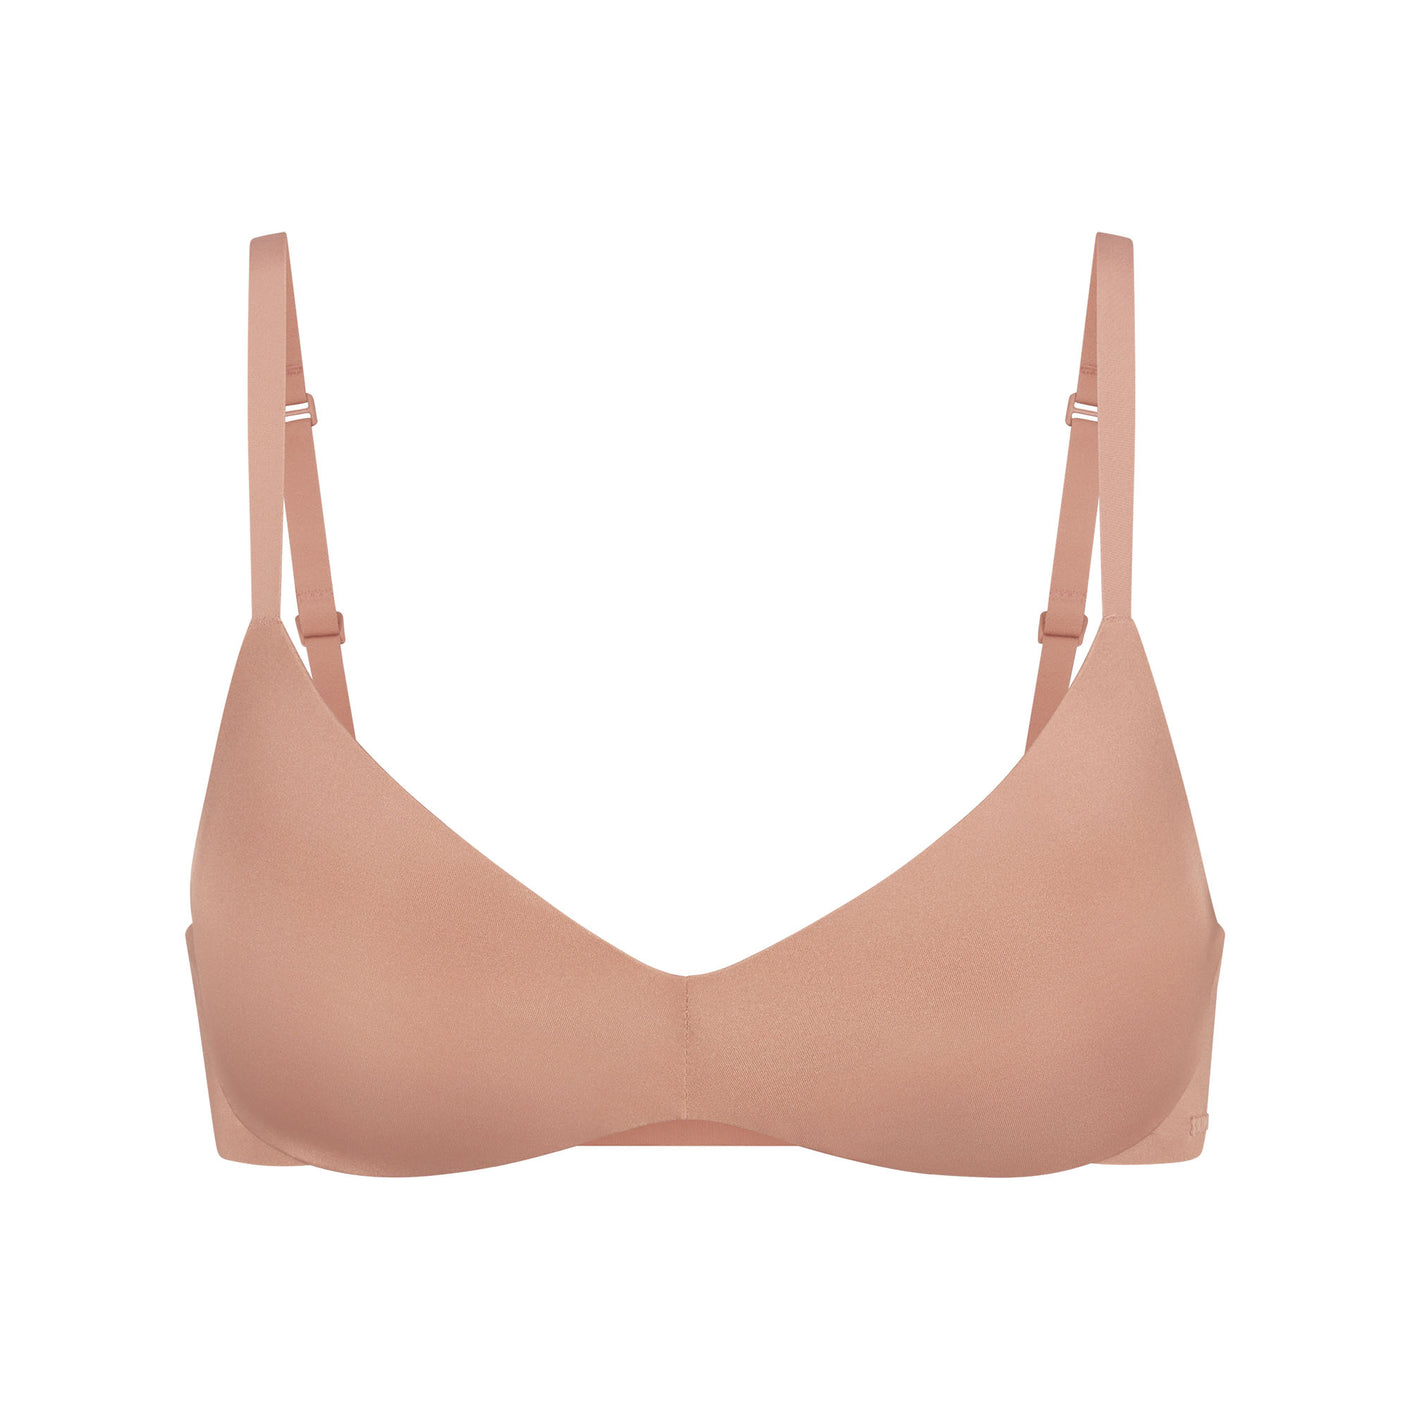 Flat chested? Try this seamless push up bra sis! Super comfy and very